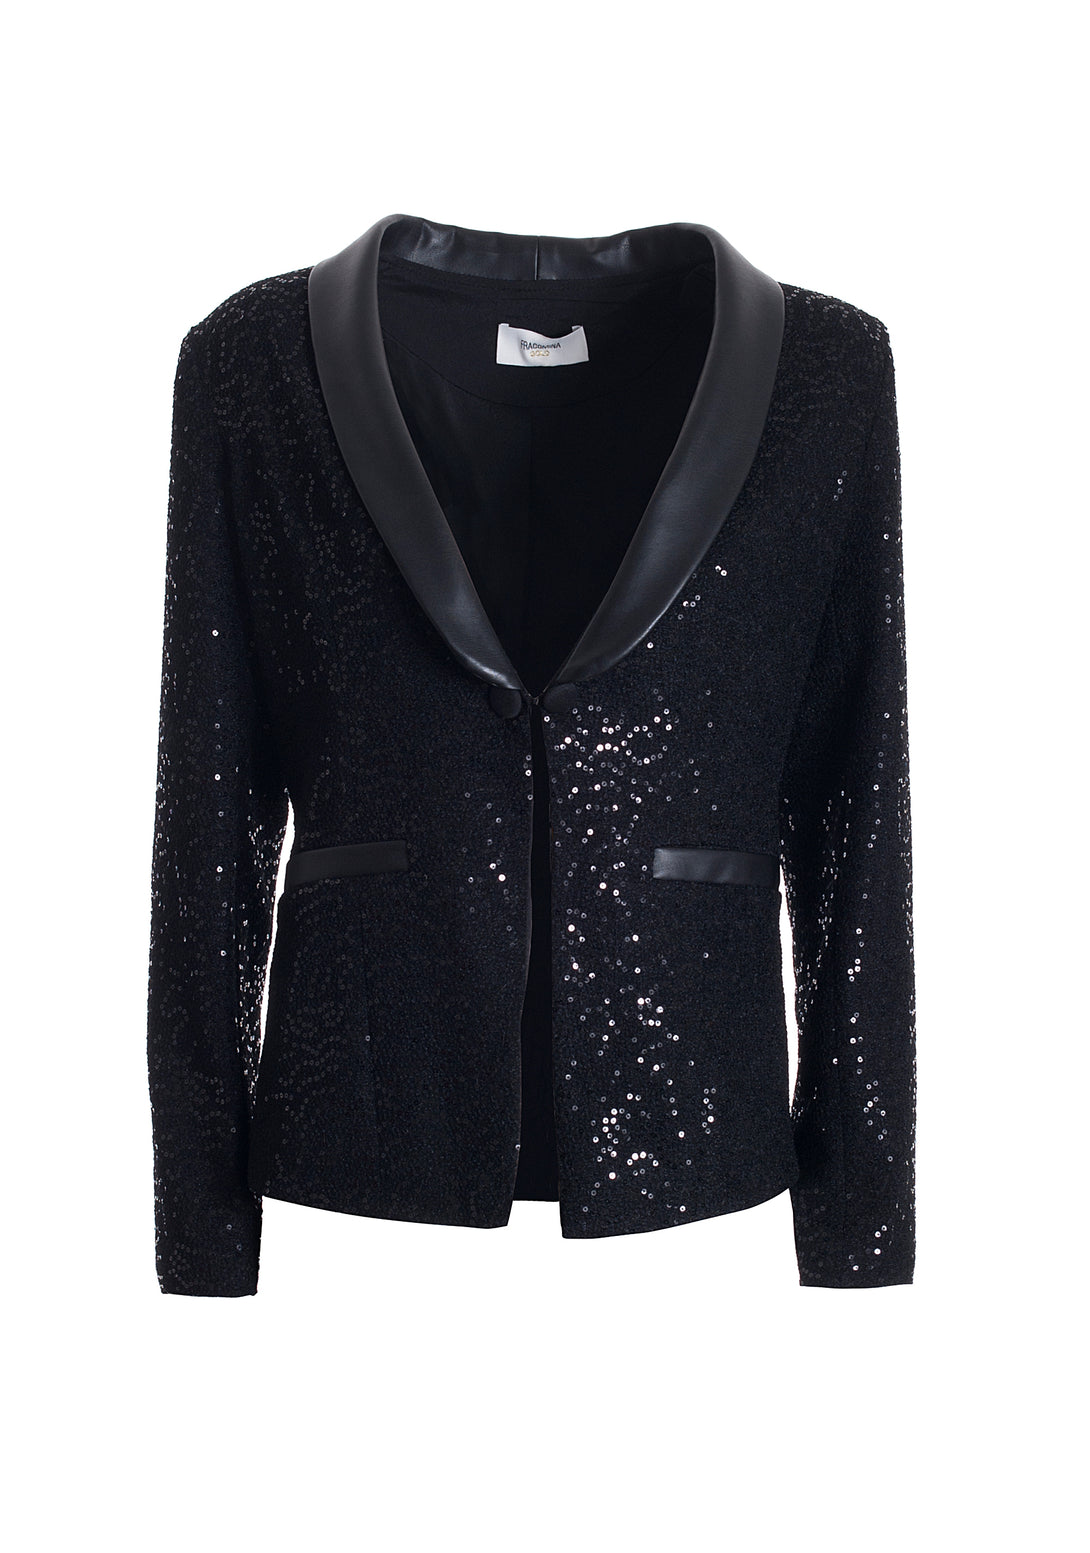 Blazer tight fit with shiny sequins